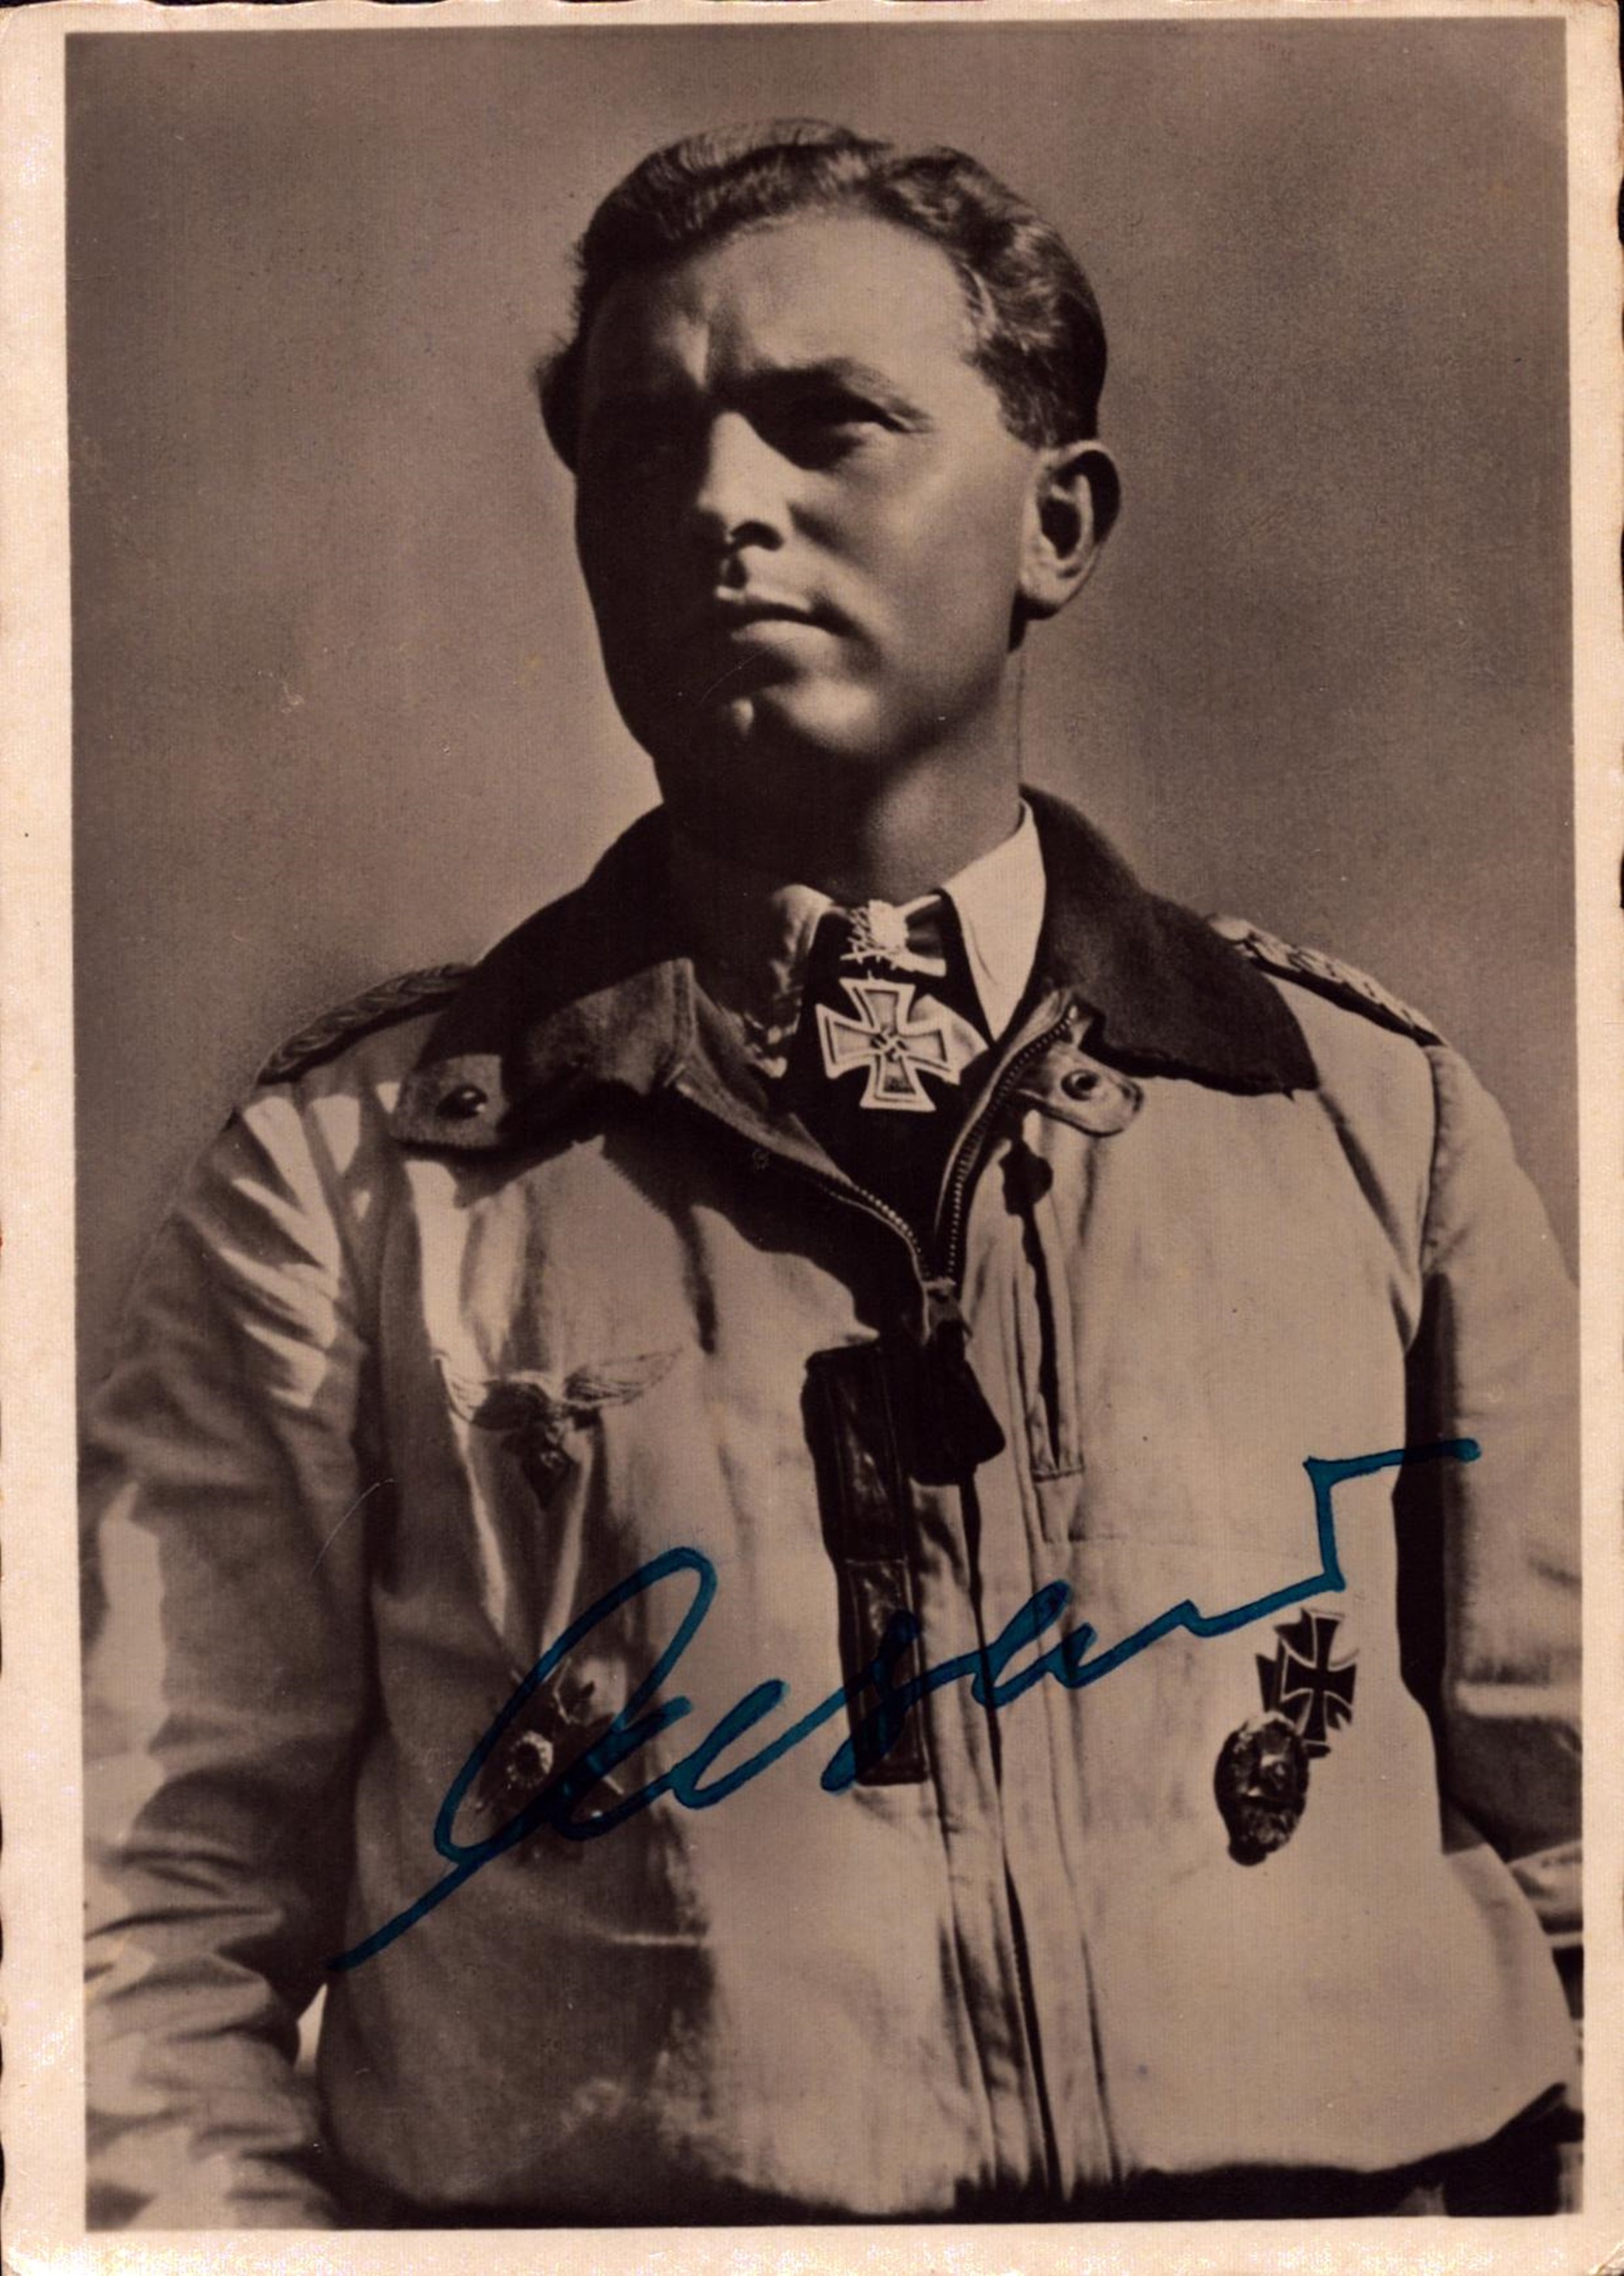 Luftwaffe Ace Walter Oesau signed 6x4 inch approx sepia photo. Walter "Gulle" Oesau (28 June - Image 2 of 3